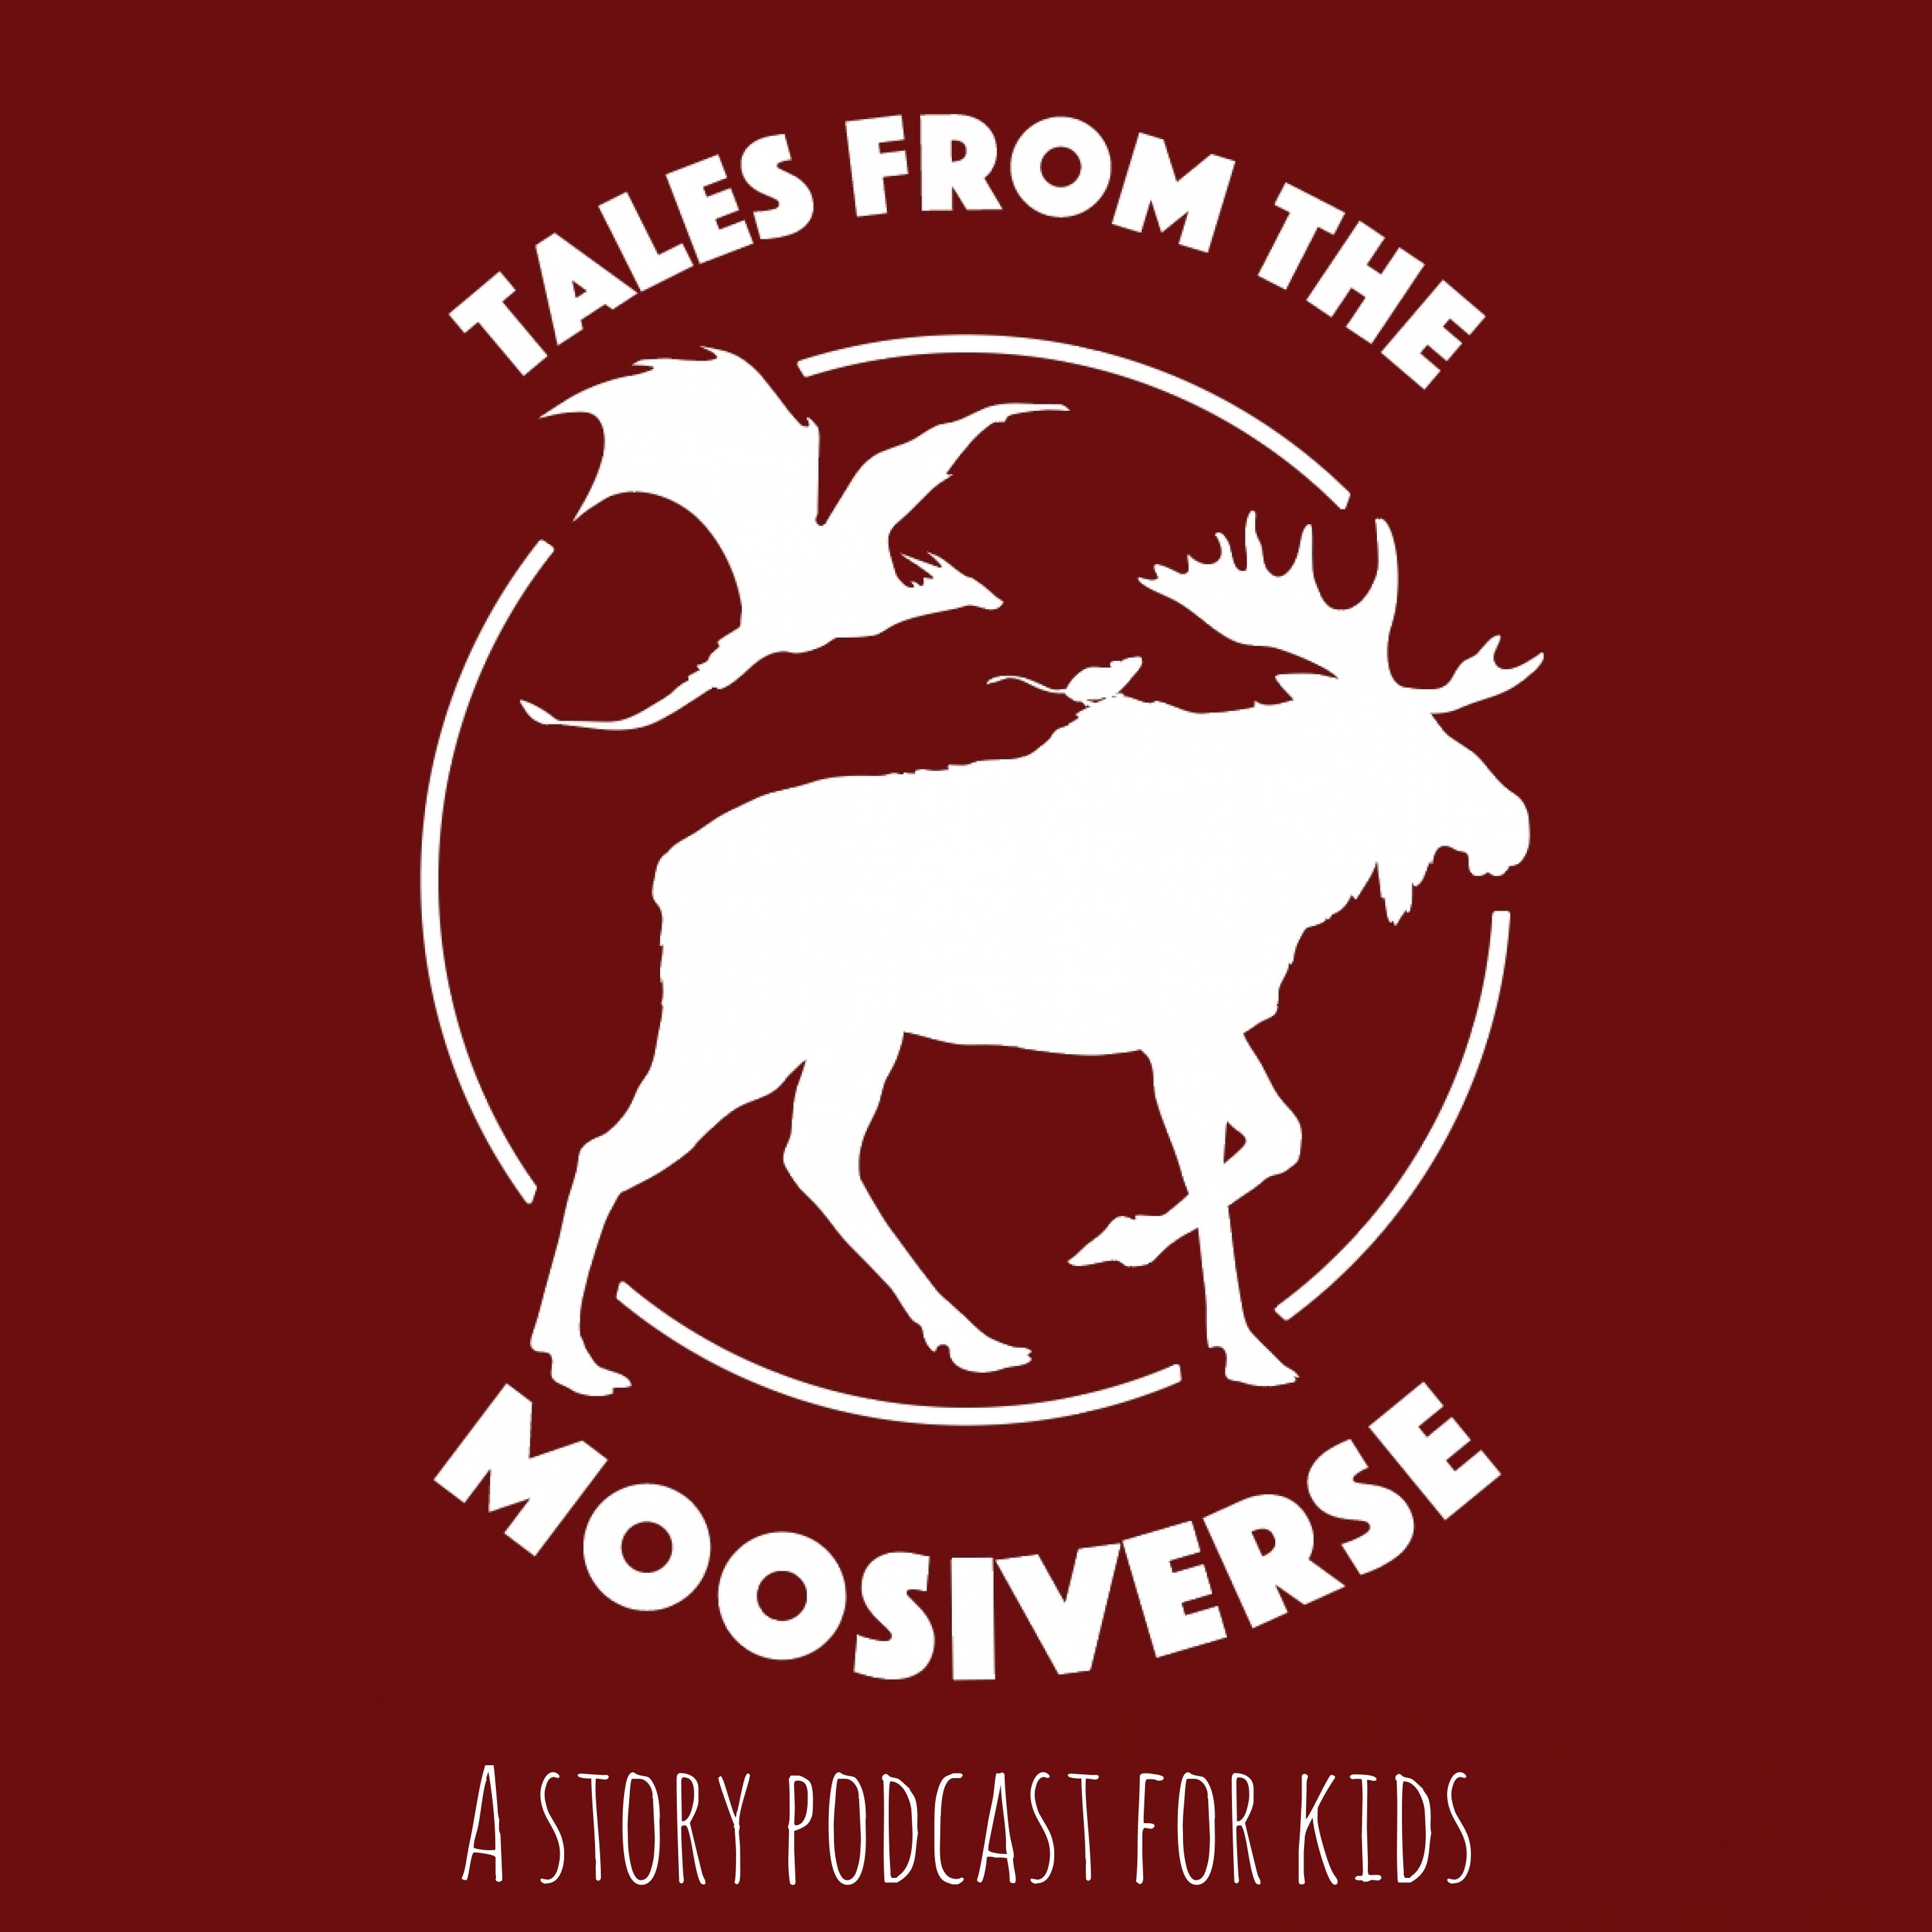 "Tales from the Moosiverse" Podcast